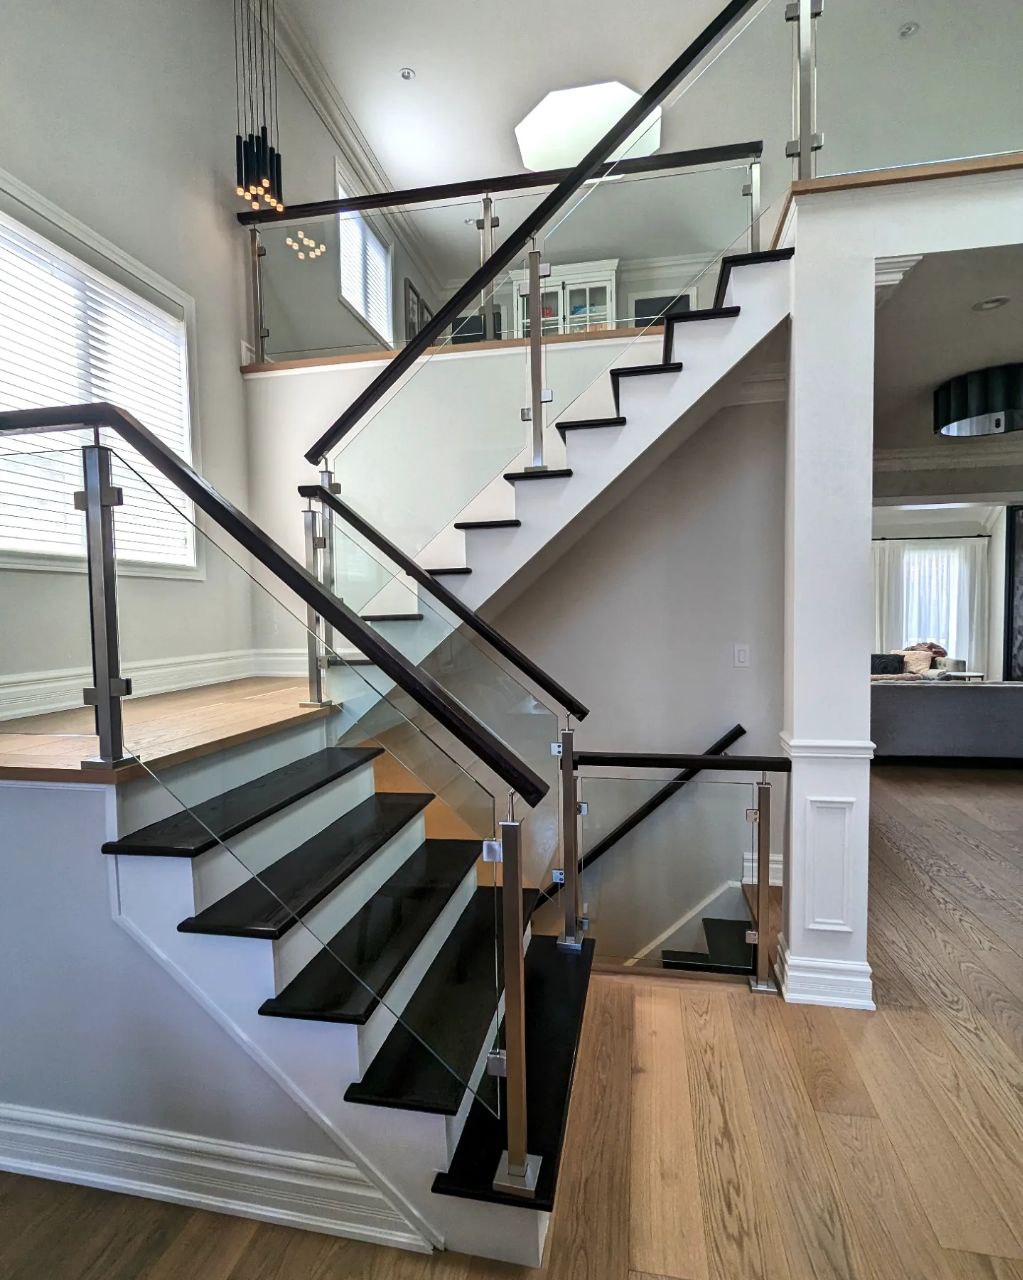 Stairs refinishing project in Oakville during a full renovation of a house. Varnished treads, painted white risers, stained handrail installed. The wall stringers and risers are painted in pure white by Sherwin Williams.